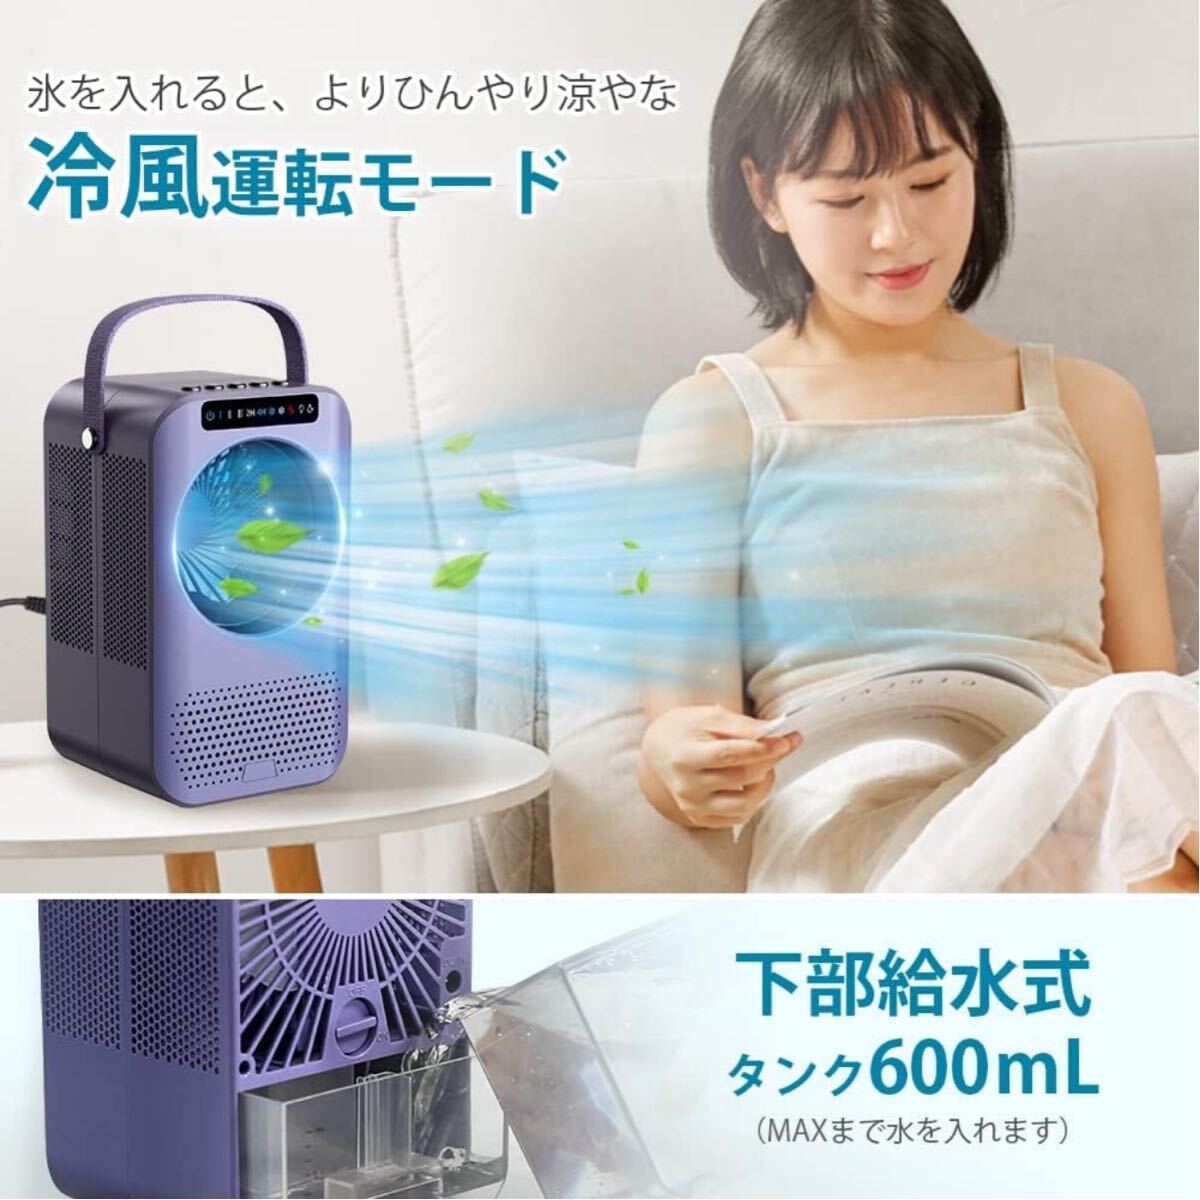  cold air fan small size cold manner machine 7 color light cold manner function desk electric fan cooling air flow 3 -step humidification Mist Mini timer high capacity 600ml continuation driving 6 hour LED Touch operation 